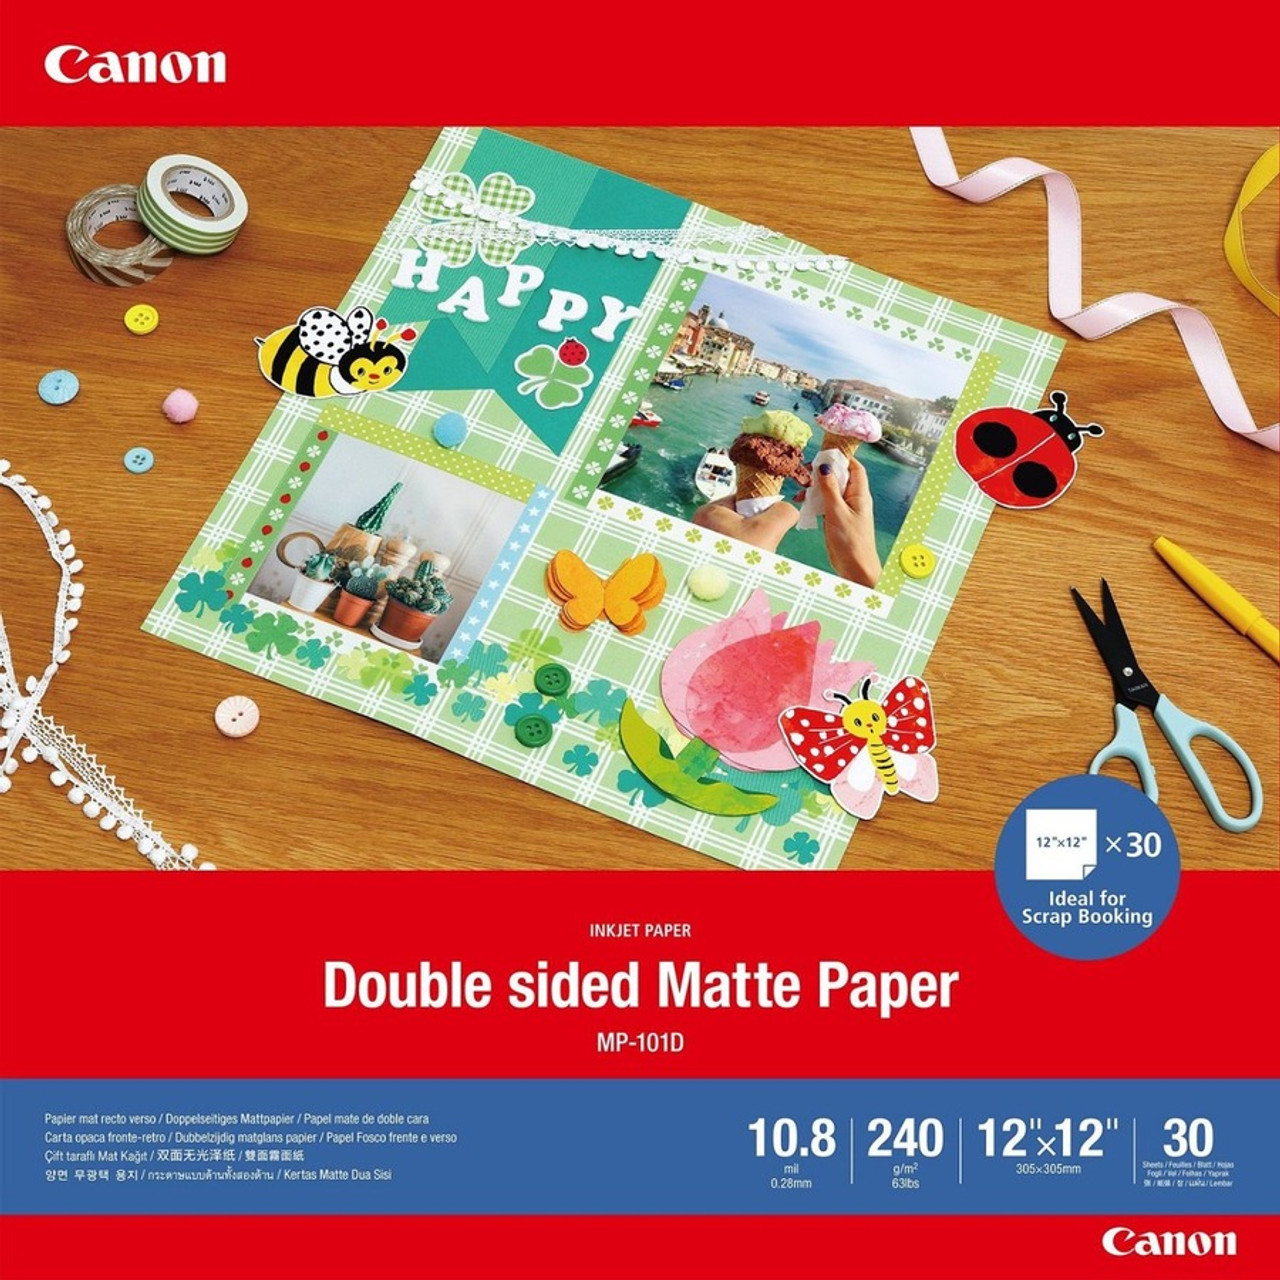 Canon Double Sided Matte Photo Paper 12x12 4076C007